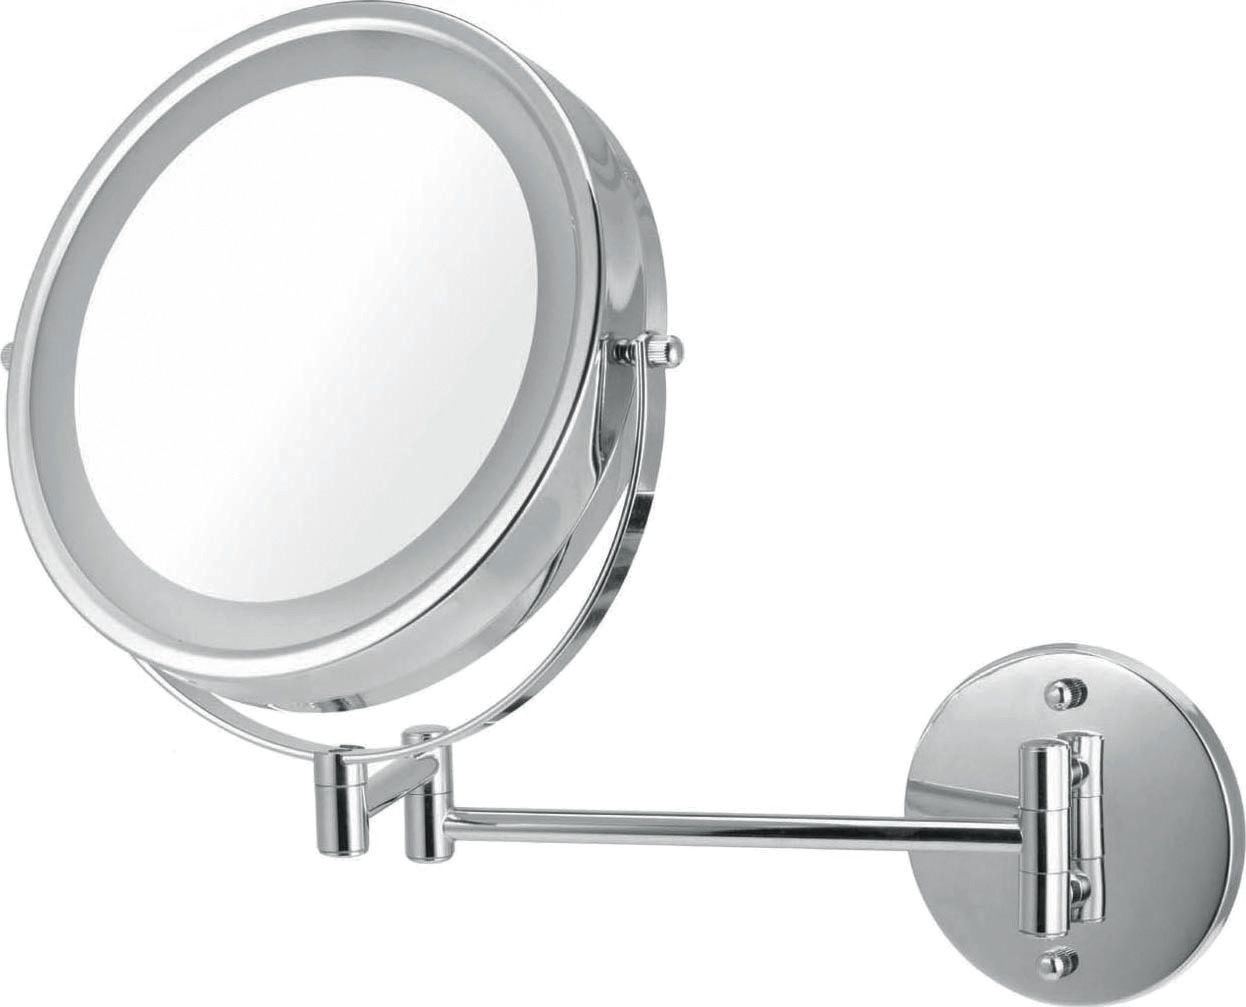 ICO Bath V9053 8.5" Double Sided Lighted Wall-Mounted Mirror - Chrome